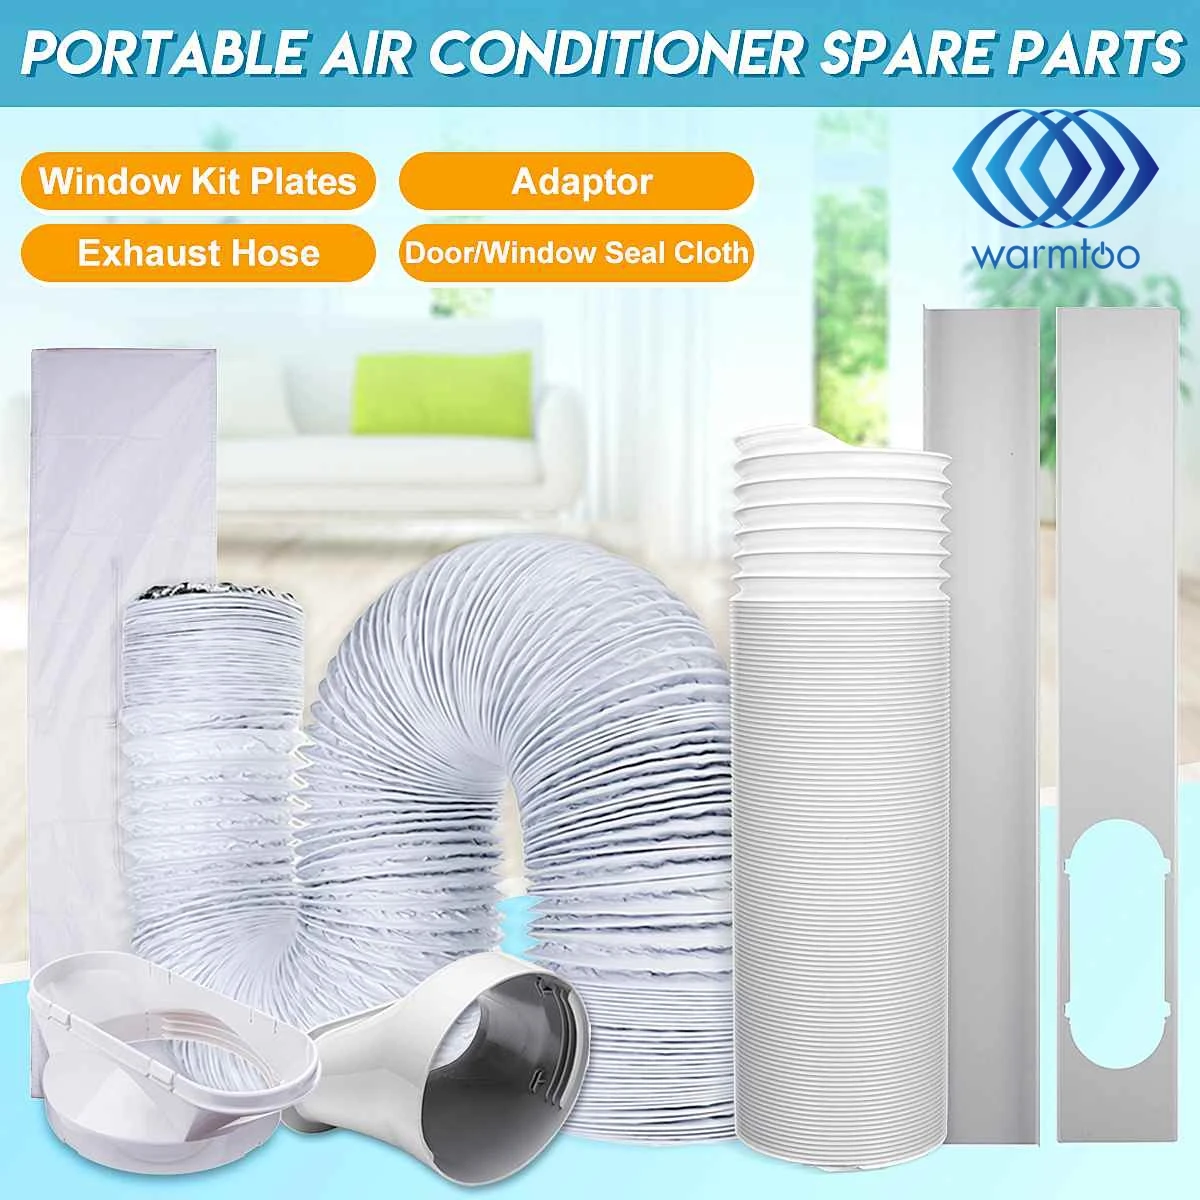 6 Meter Grey Extension Hose To Fit Portable Air Conditioners Connect Easily To Your Existing Vent Exhaust Hose Extending It By 6 Meters 